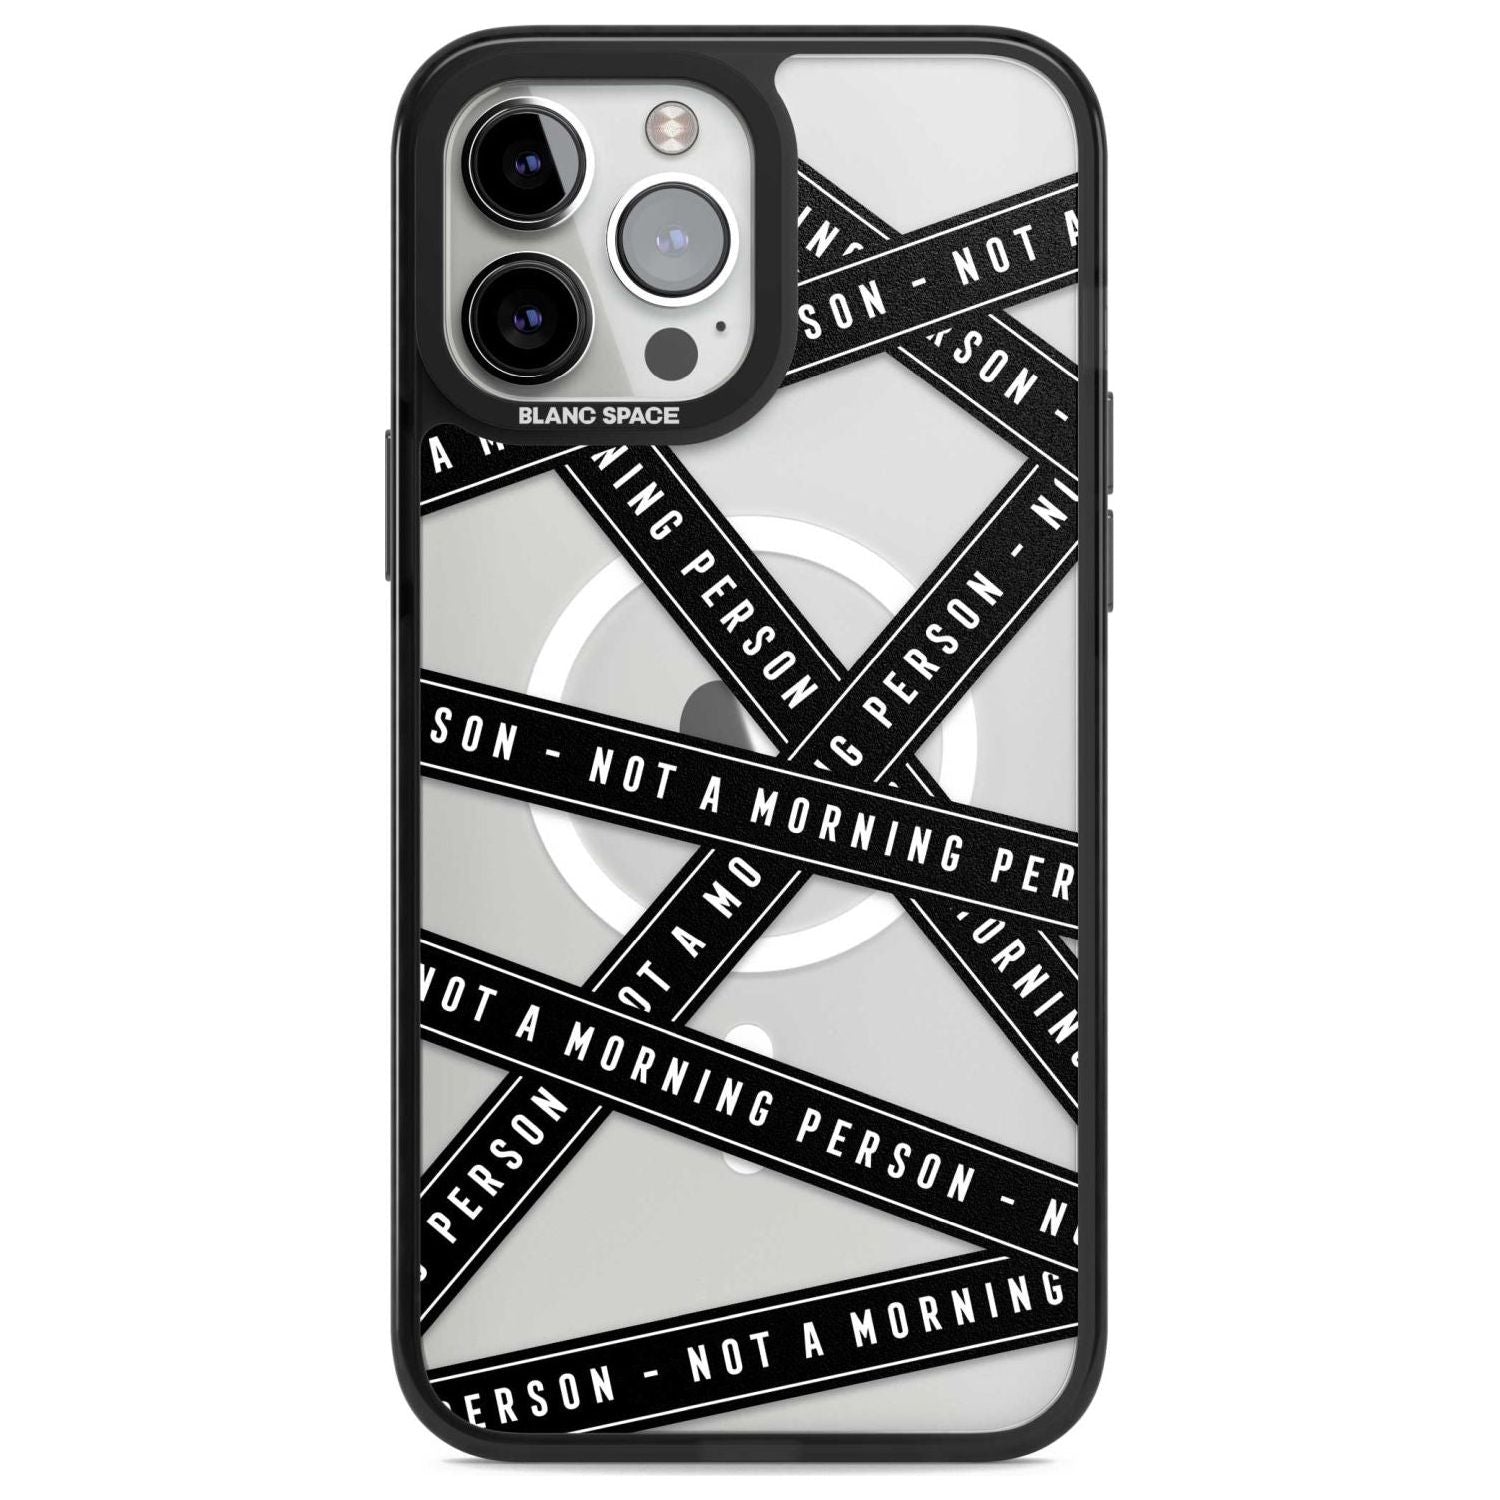 Caution Tape (Clear) Not a Morning Person Phone Case iPhone 13 Pro Max / Magsafe Black Impact Case Blanc Space